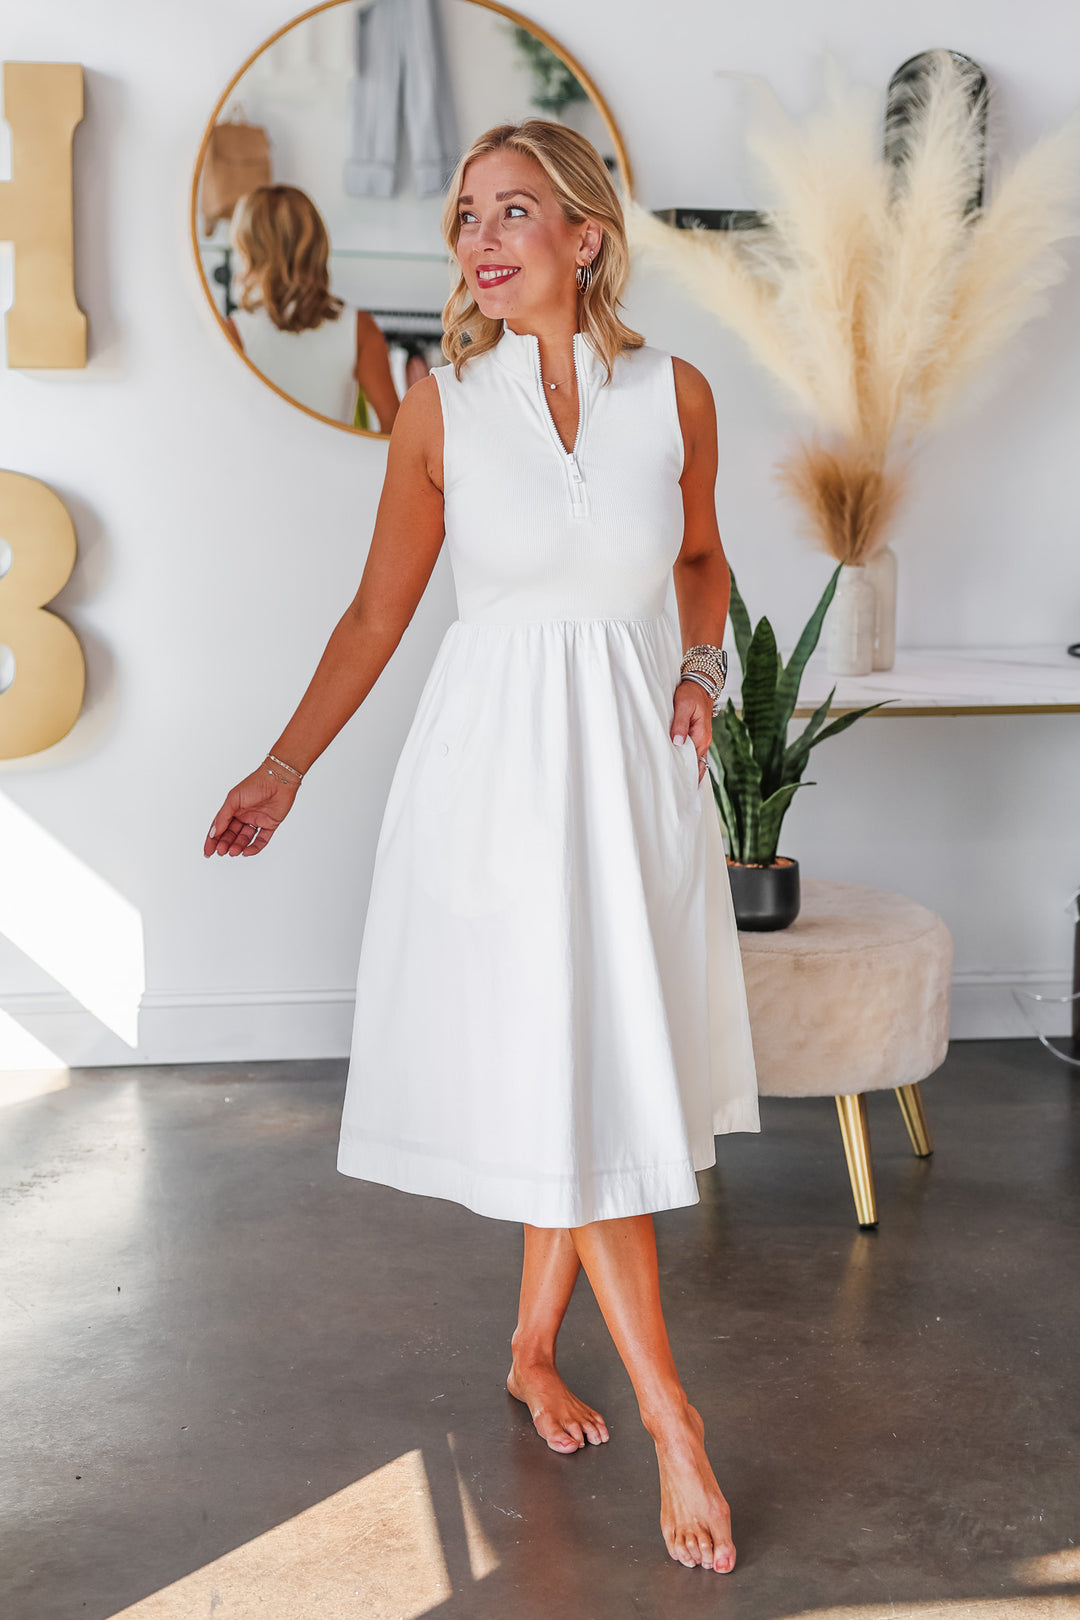 A blonde woman standing in a shop wearing a white dress with a zip collar closure and nylon skirt.